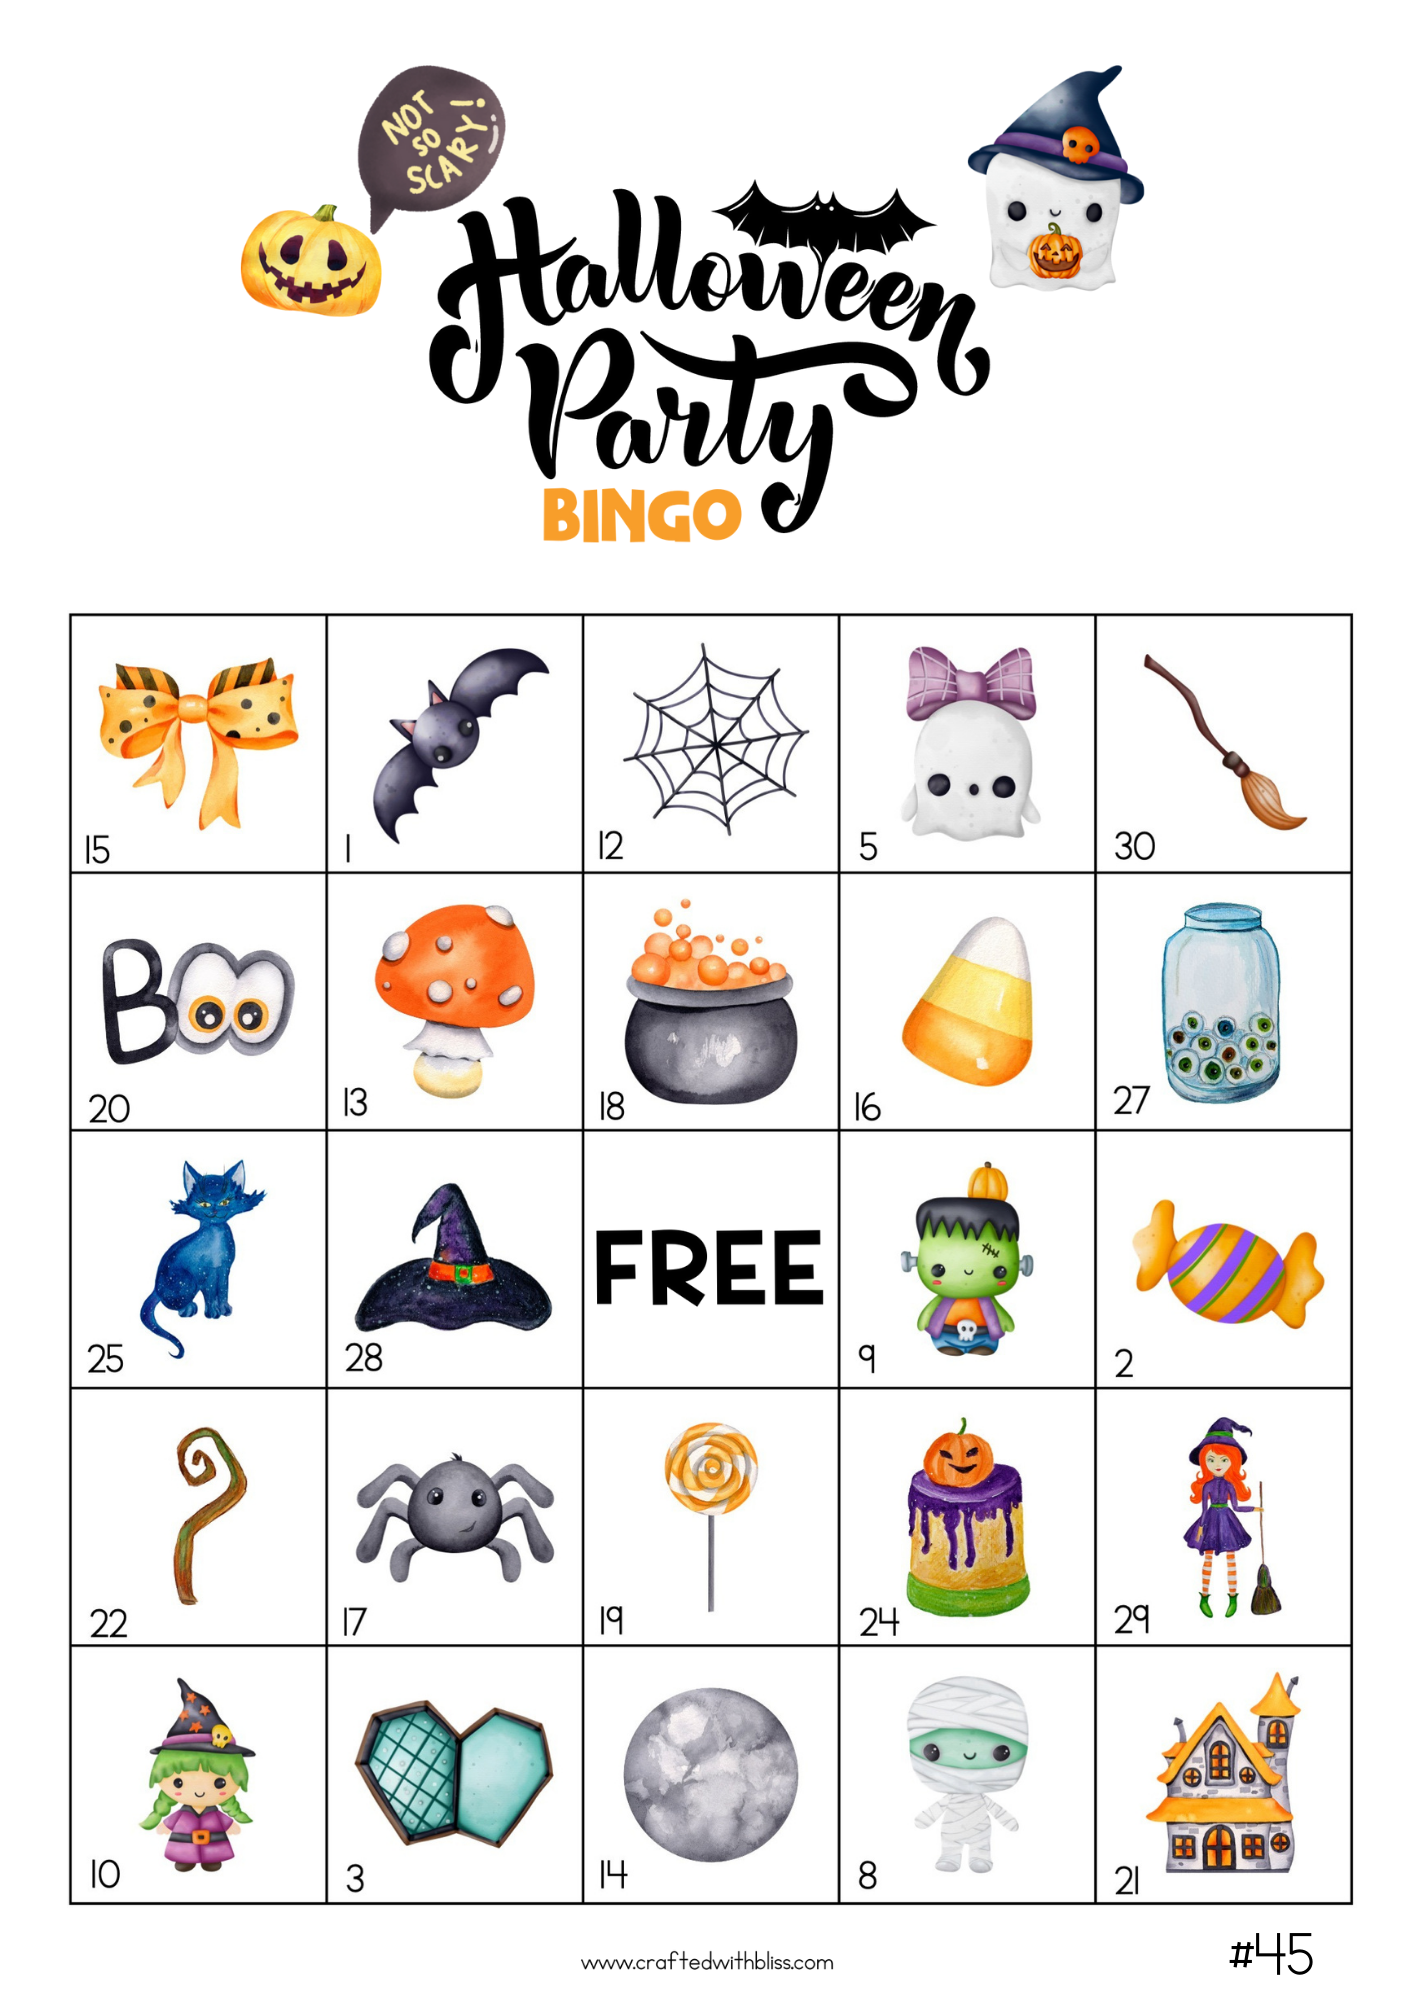 50 Watercolor Halloween Bingo Cards (5x5) – CraftedwithBliss